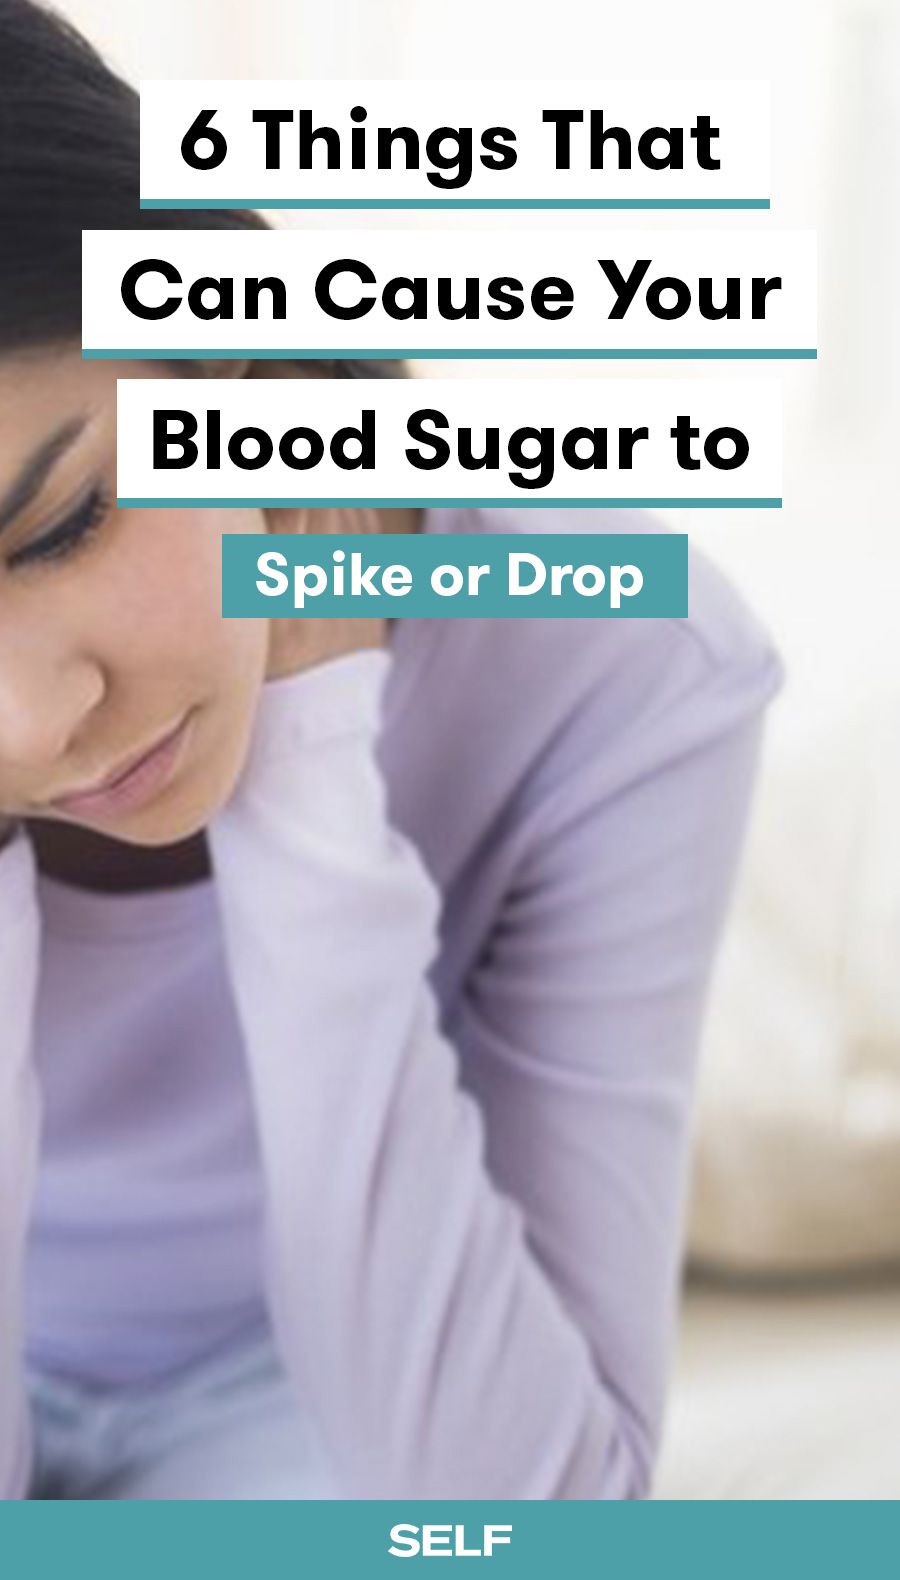 6 Things That Can Cause Your Blood Sugar to Spike or Drop ...